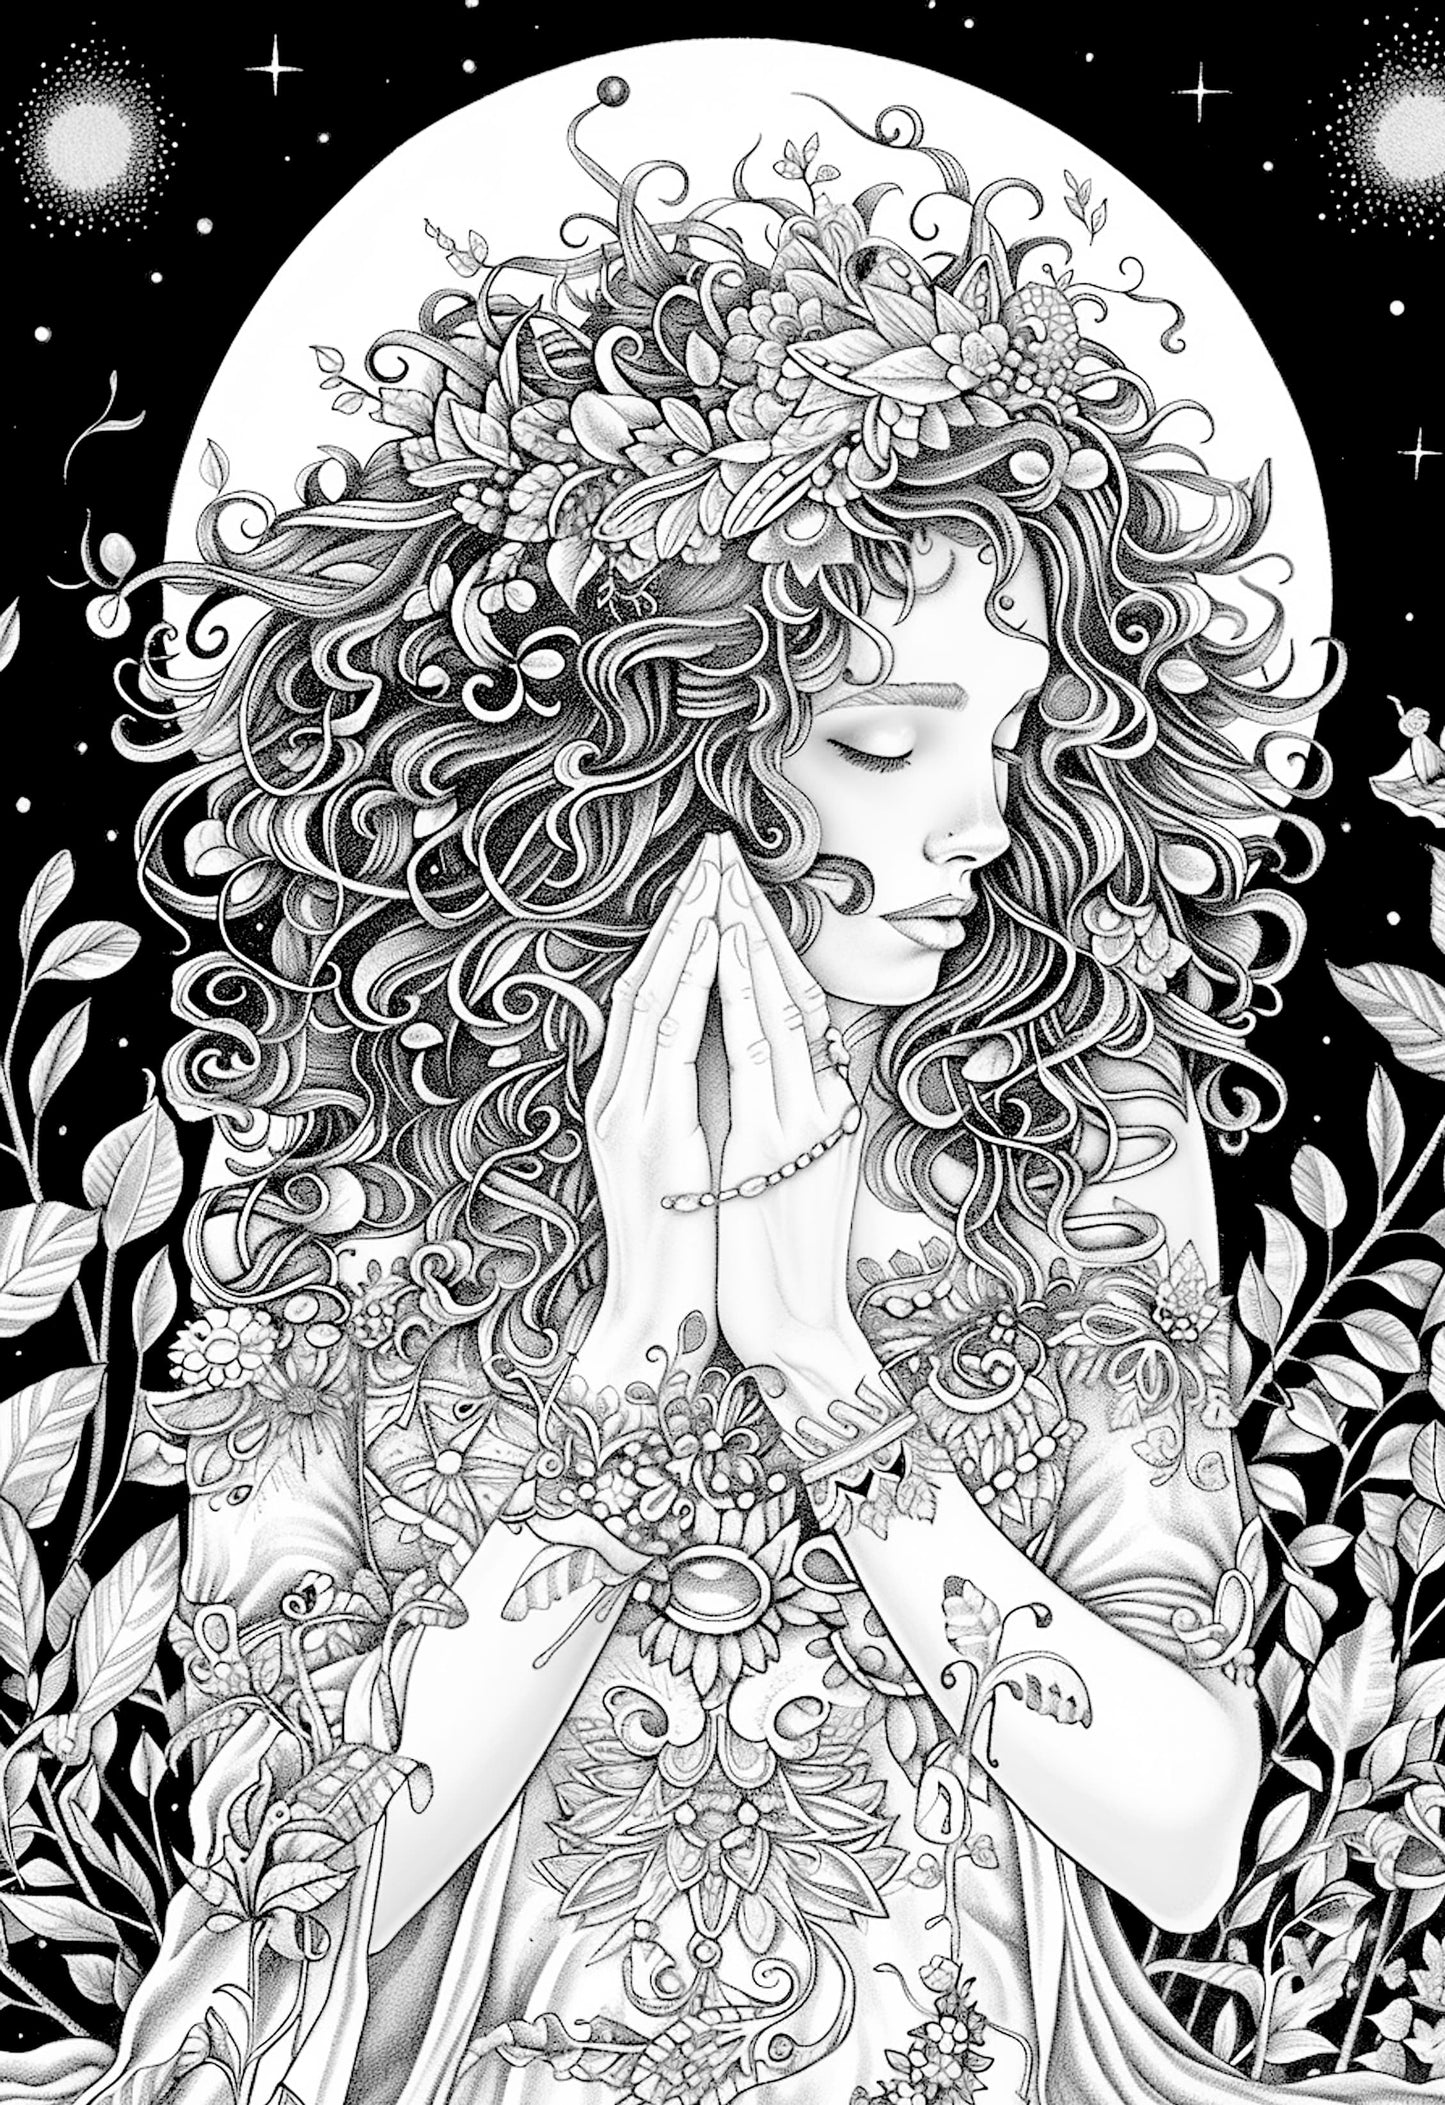 Moon Maiden Coloring Book Grayscale (Digital)